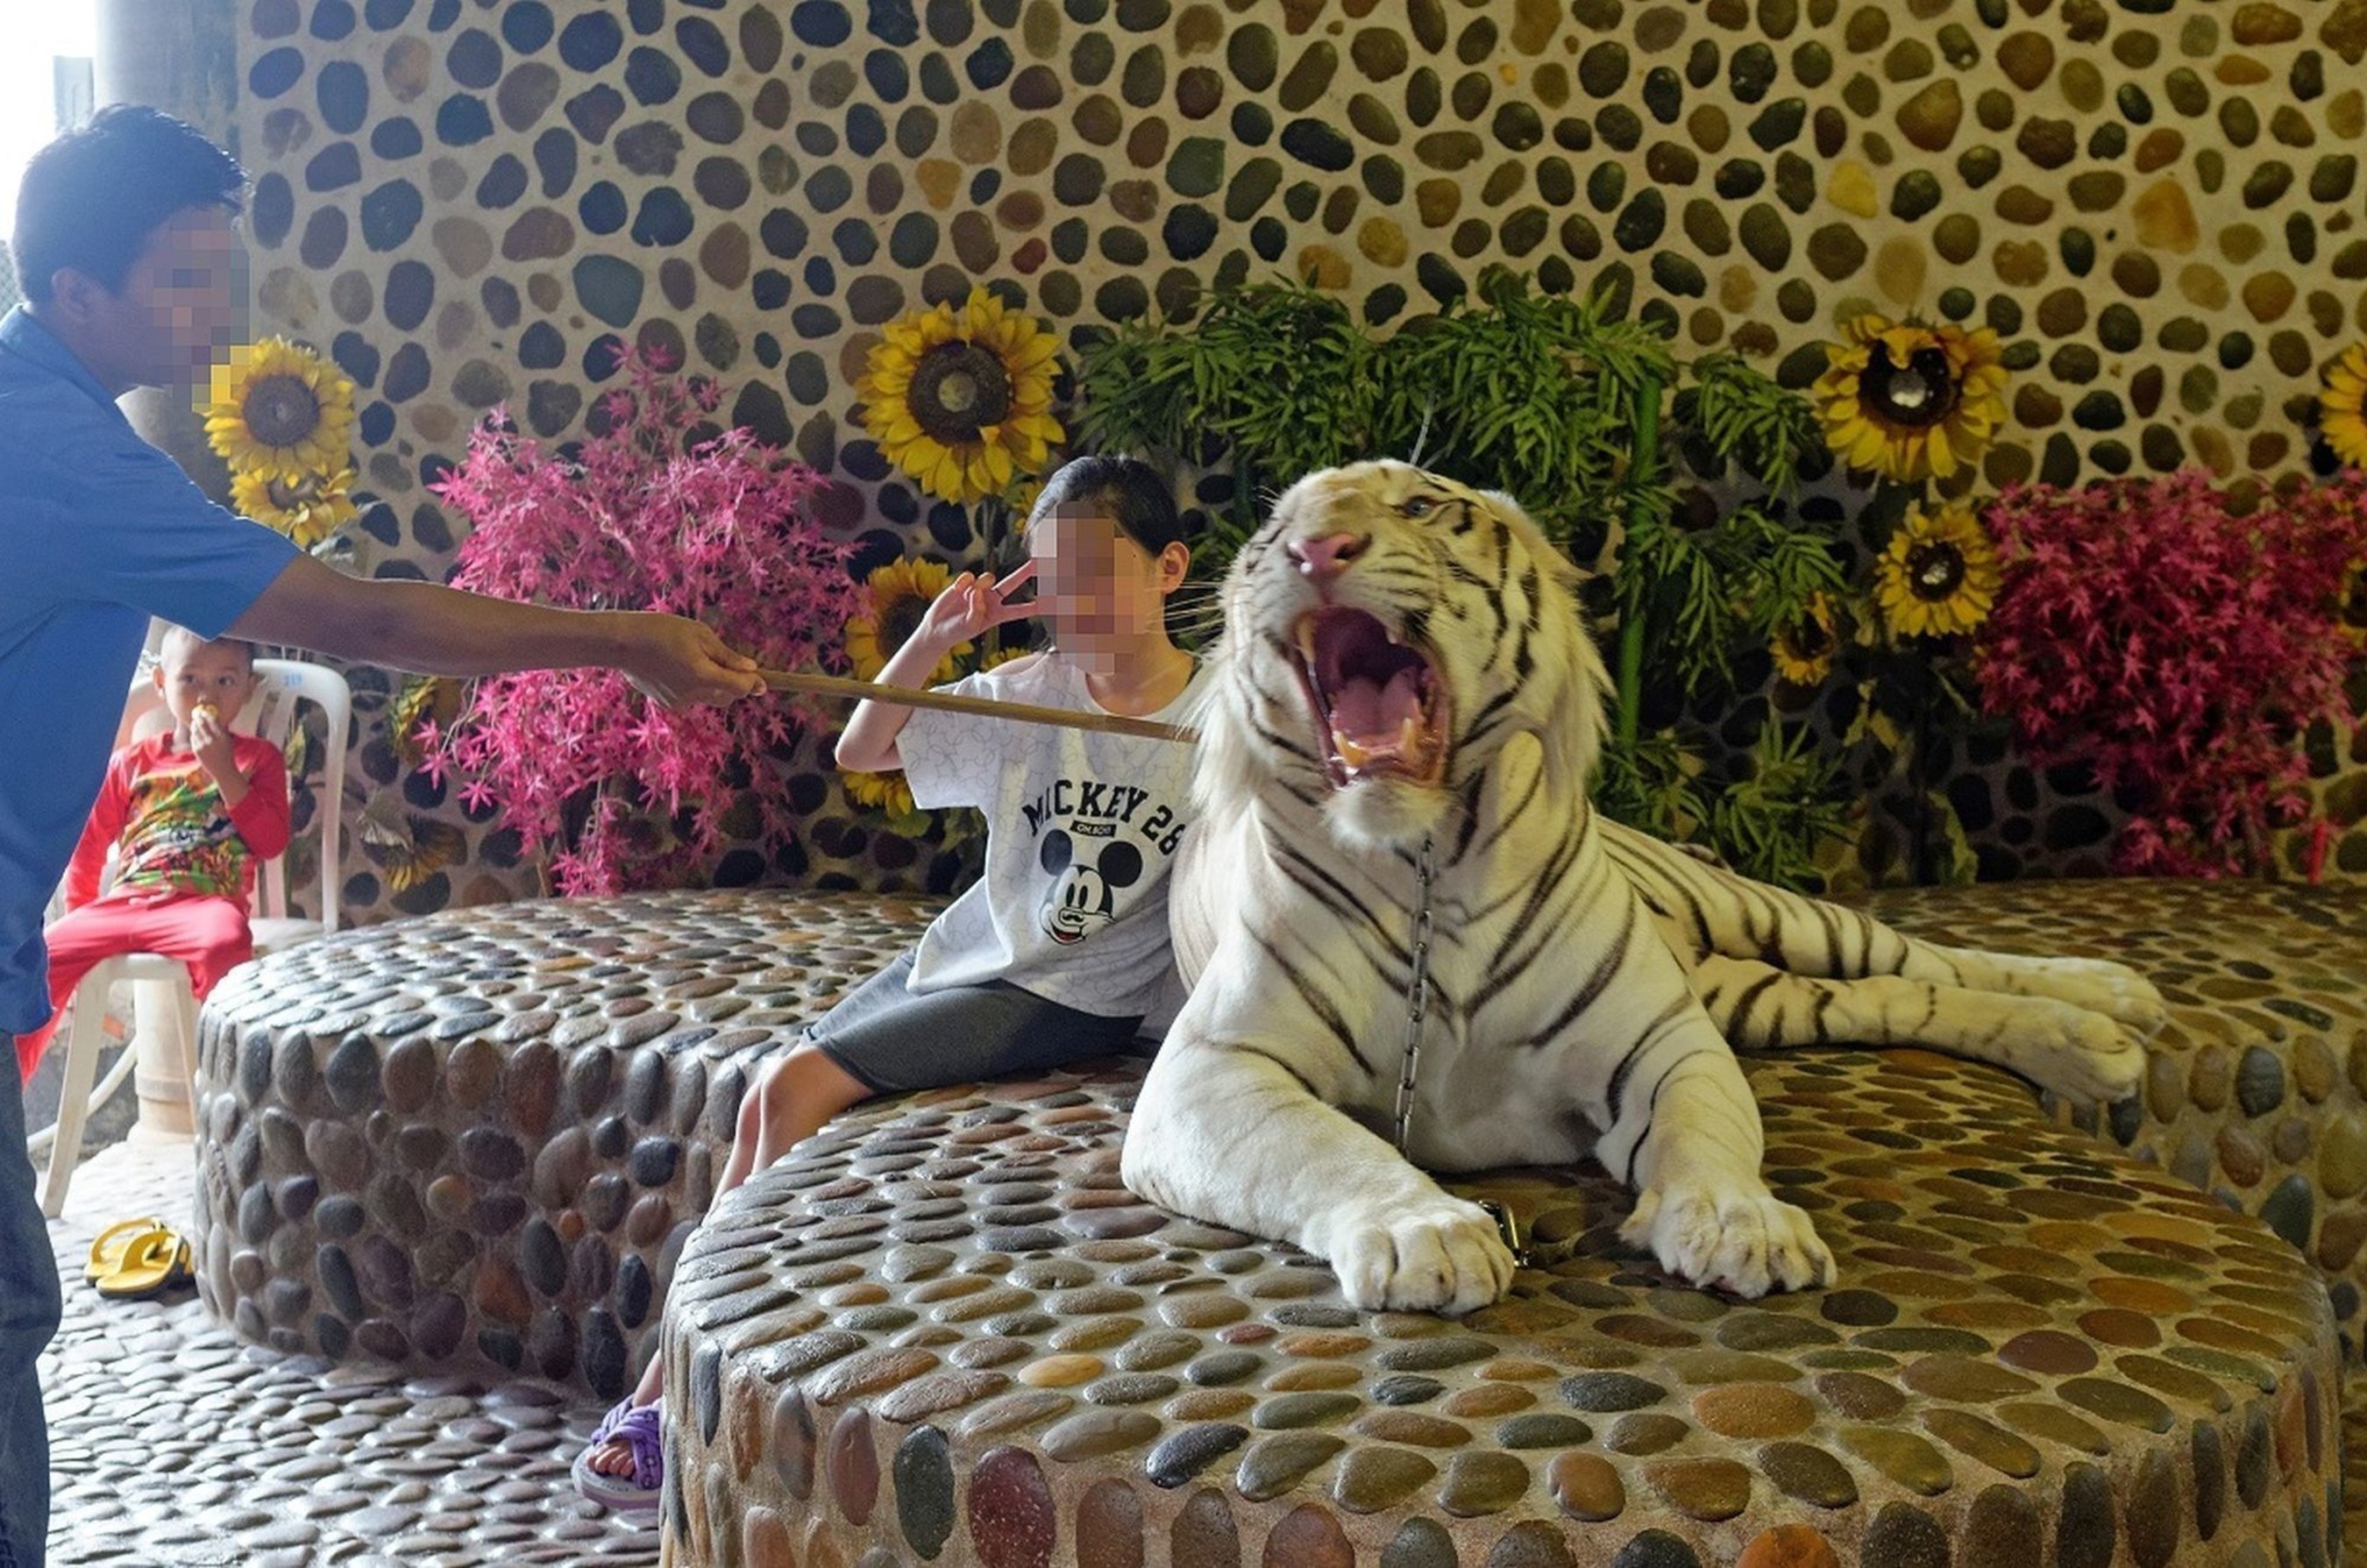 World Animal Protection Exposes the Suffering Behind Tiger Selfie Tourism  in Thailand (Intl Tiger Day 29 July)